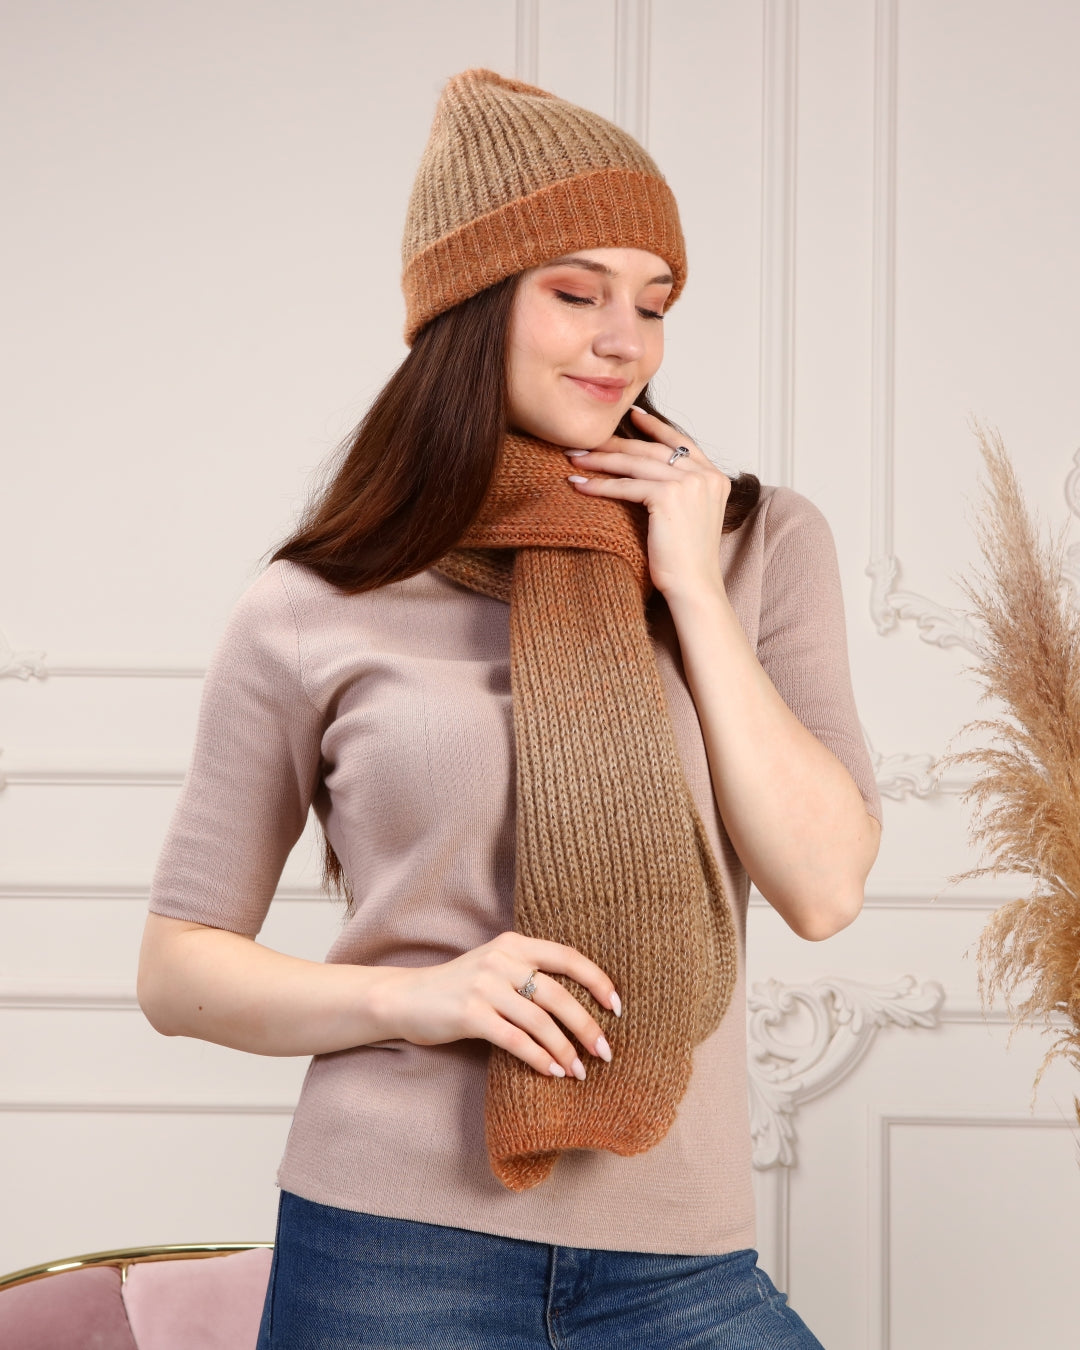 Knitted Beanie and Scarf Set - Girl's Cozy Hat Scarf - Trending Fashion Outfit for Winter - Wear Sierra